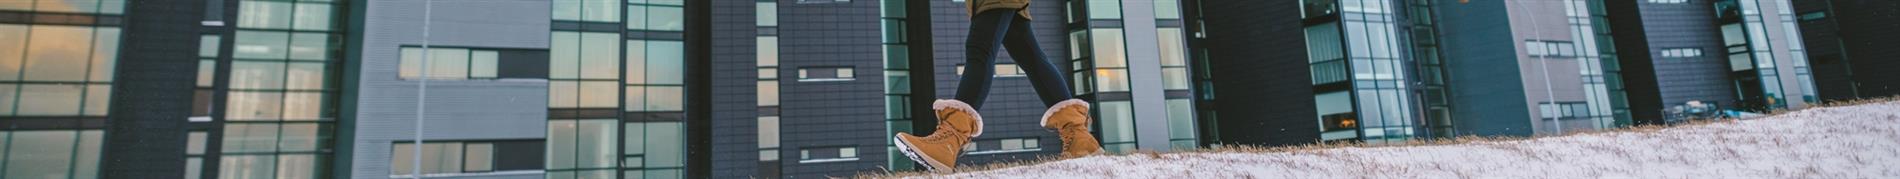 Bogs Warm Women's Winter Boots for Style and Comfort 